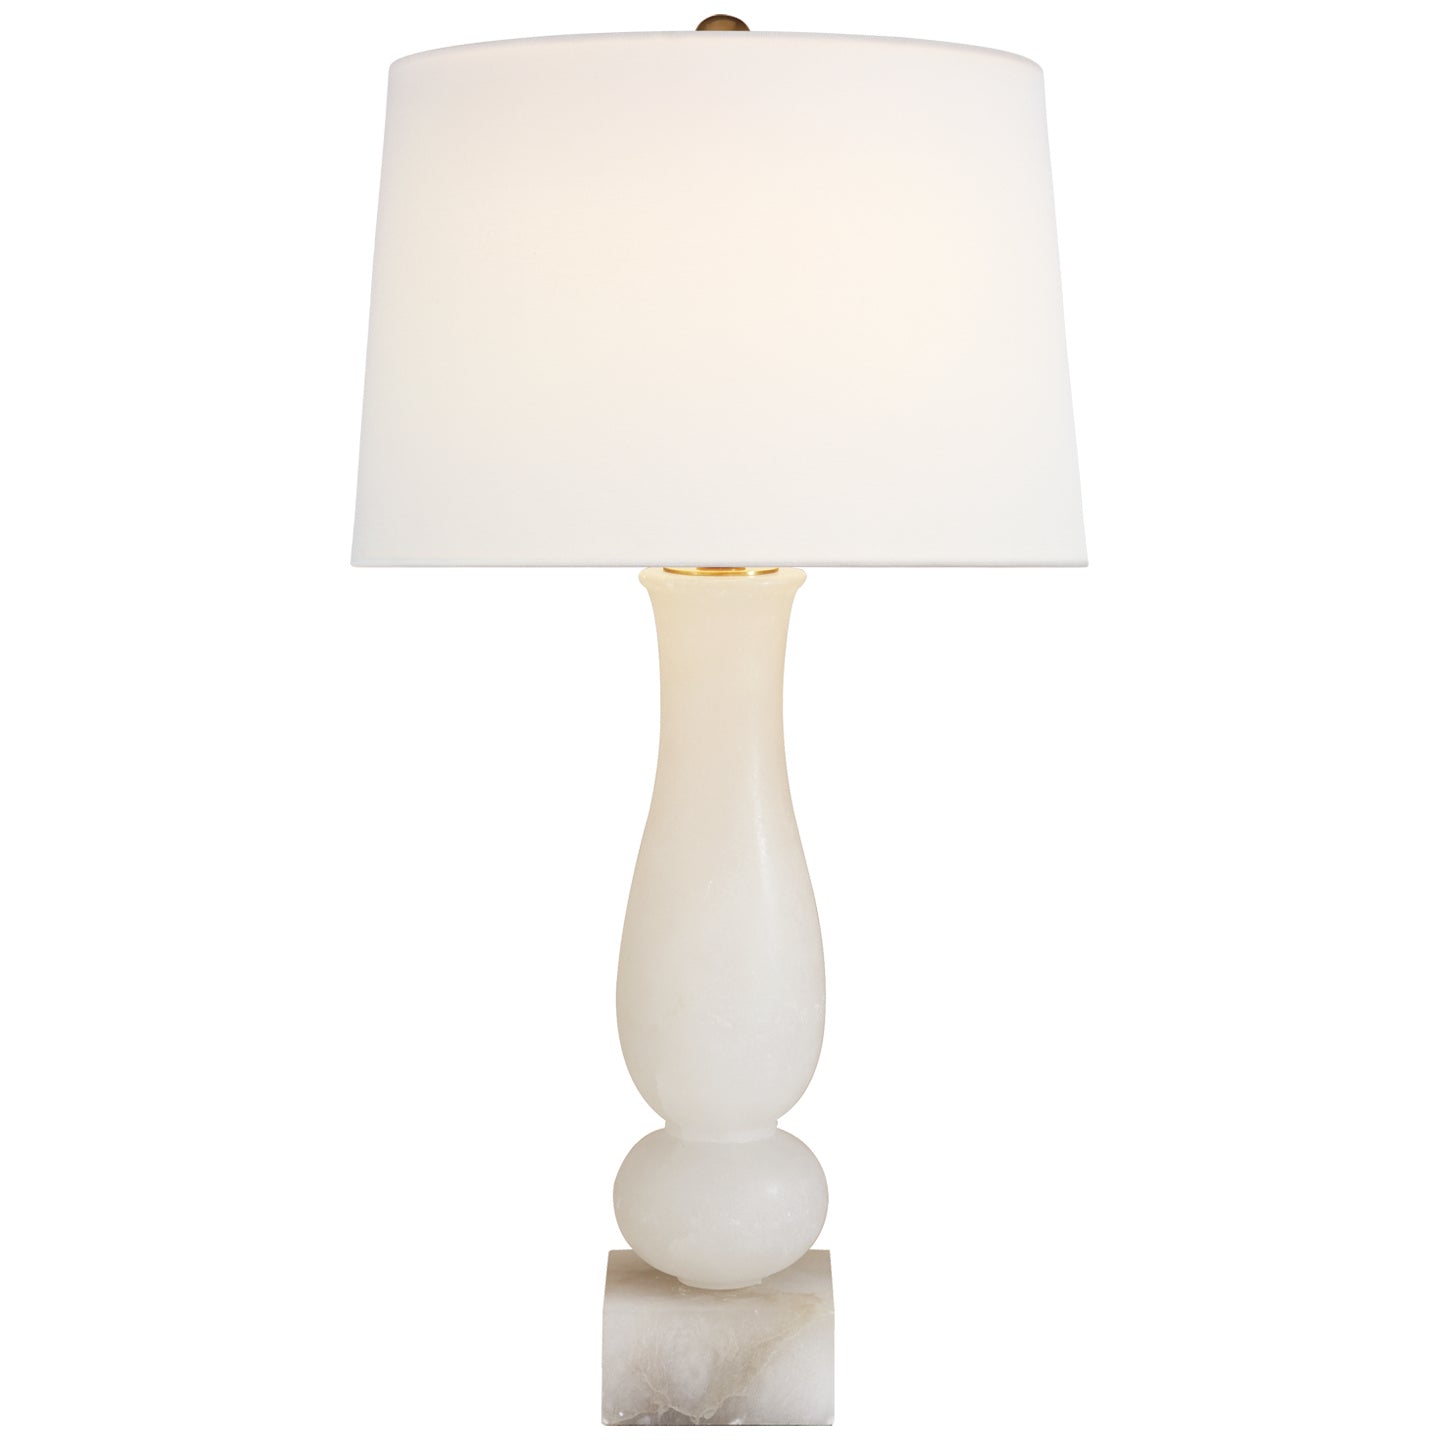 Load image into Gallery viewer, Visual Comfort Signature - CHA 8646ALB-L - One Light Table Lamp - Contemporary Balustrade - Alabaster
